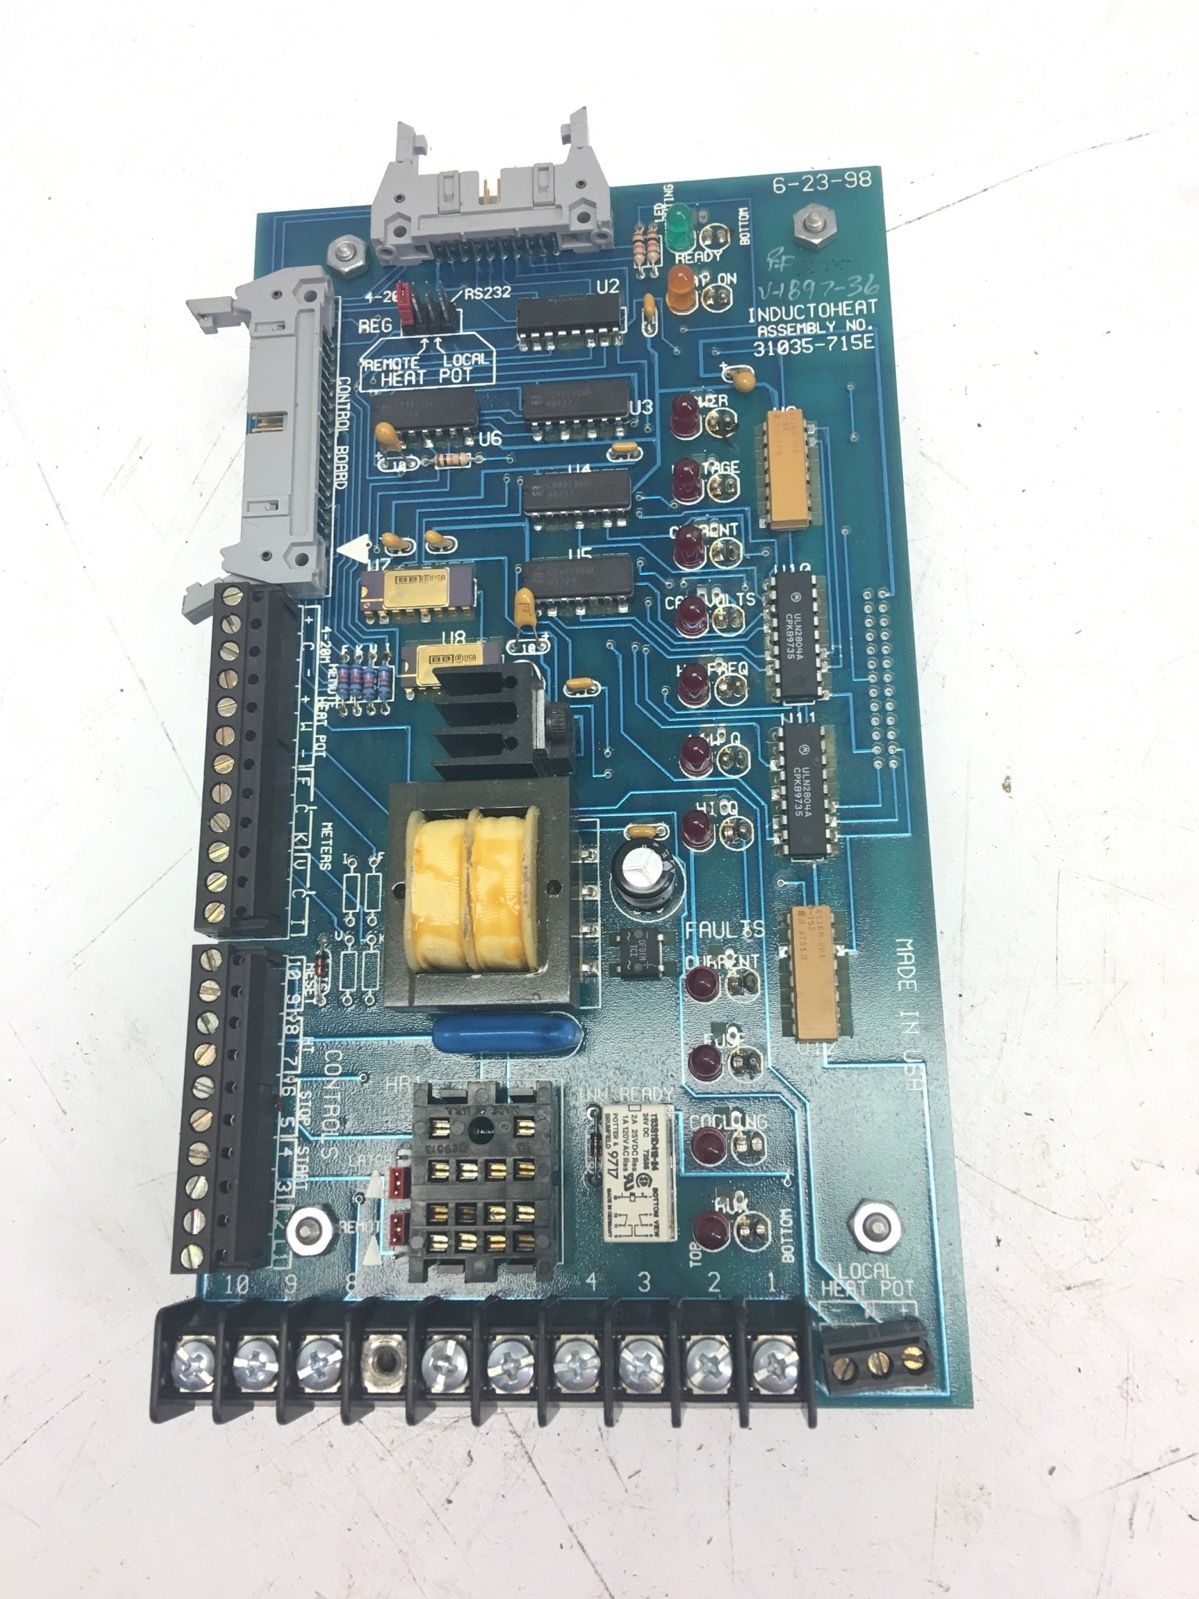 USED IN GREAT CONDITION INDUCTOHEATÂ 31035-715E ANNUNCIATOR INTERFACE ASSY, B273 1